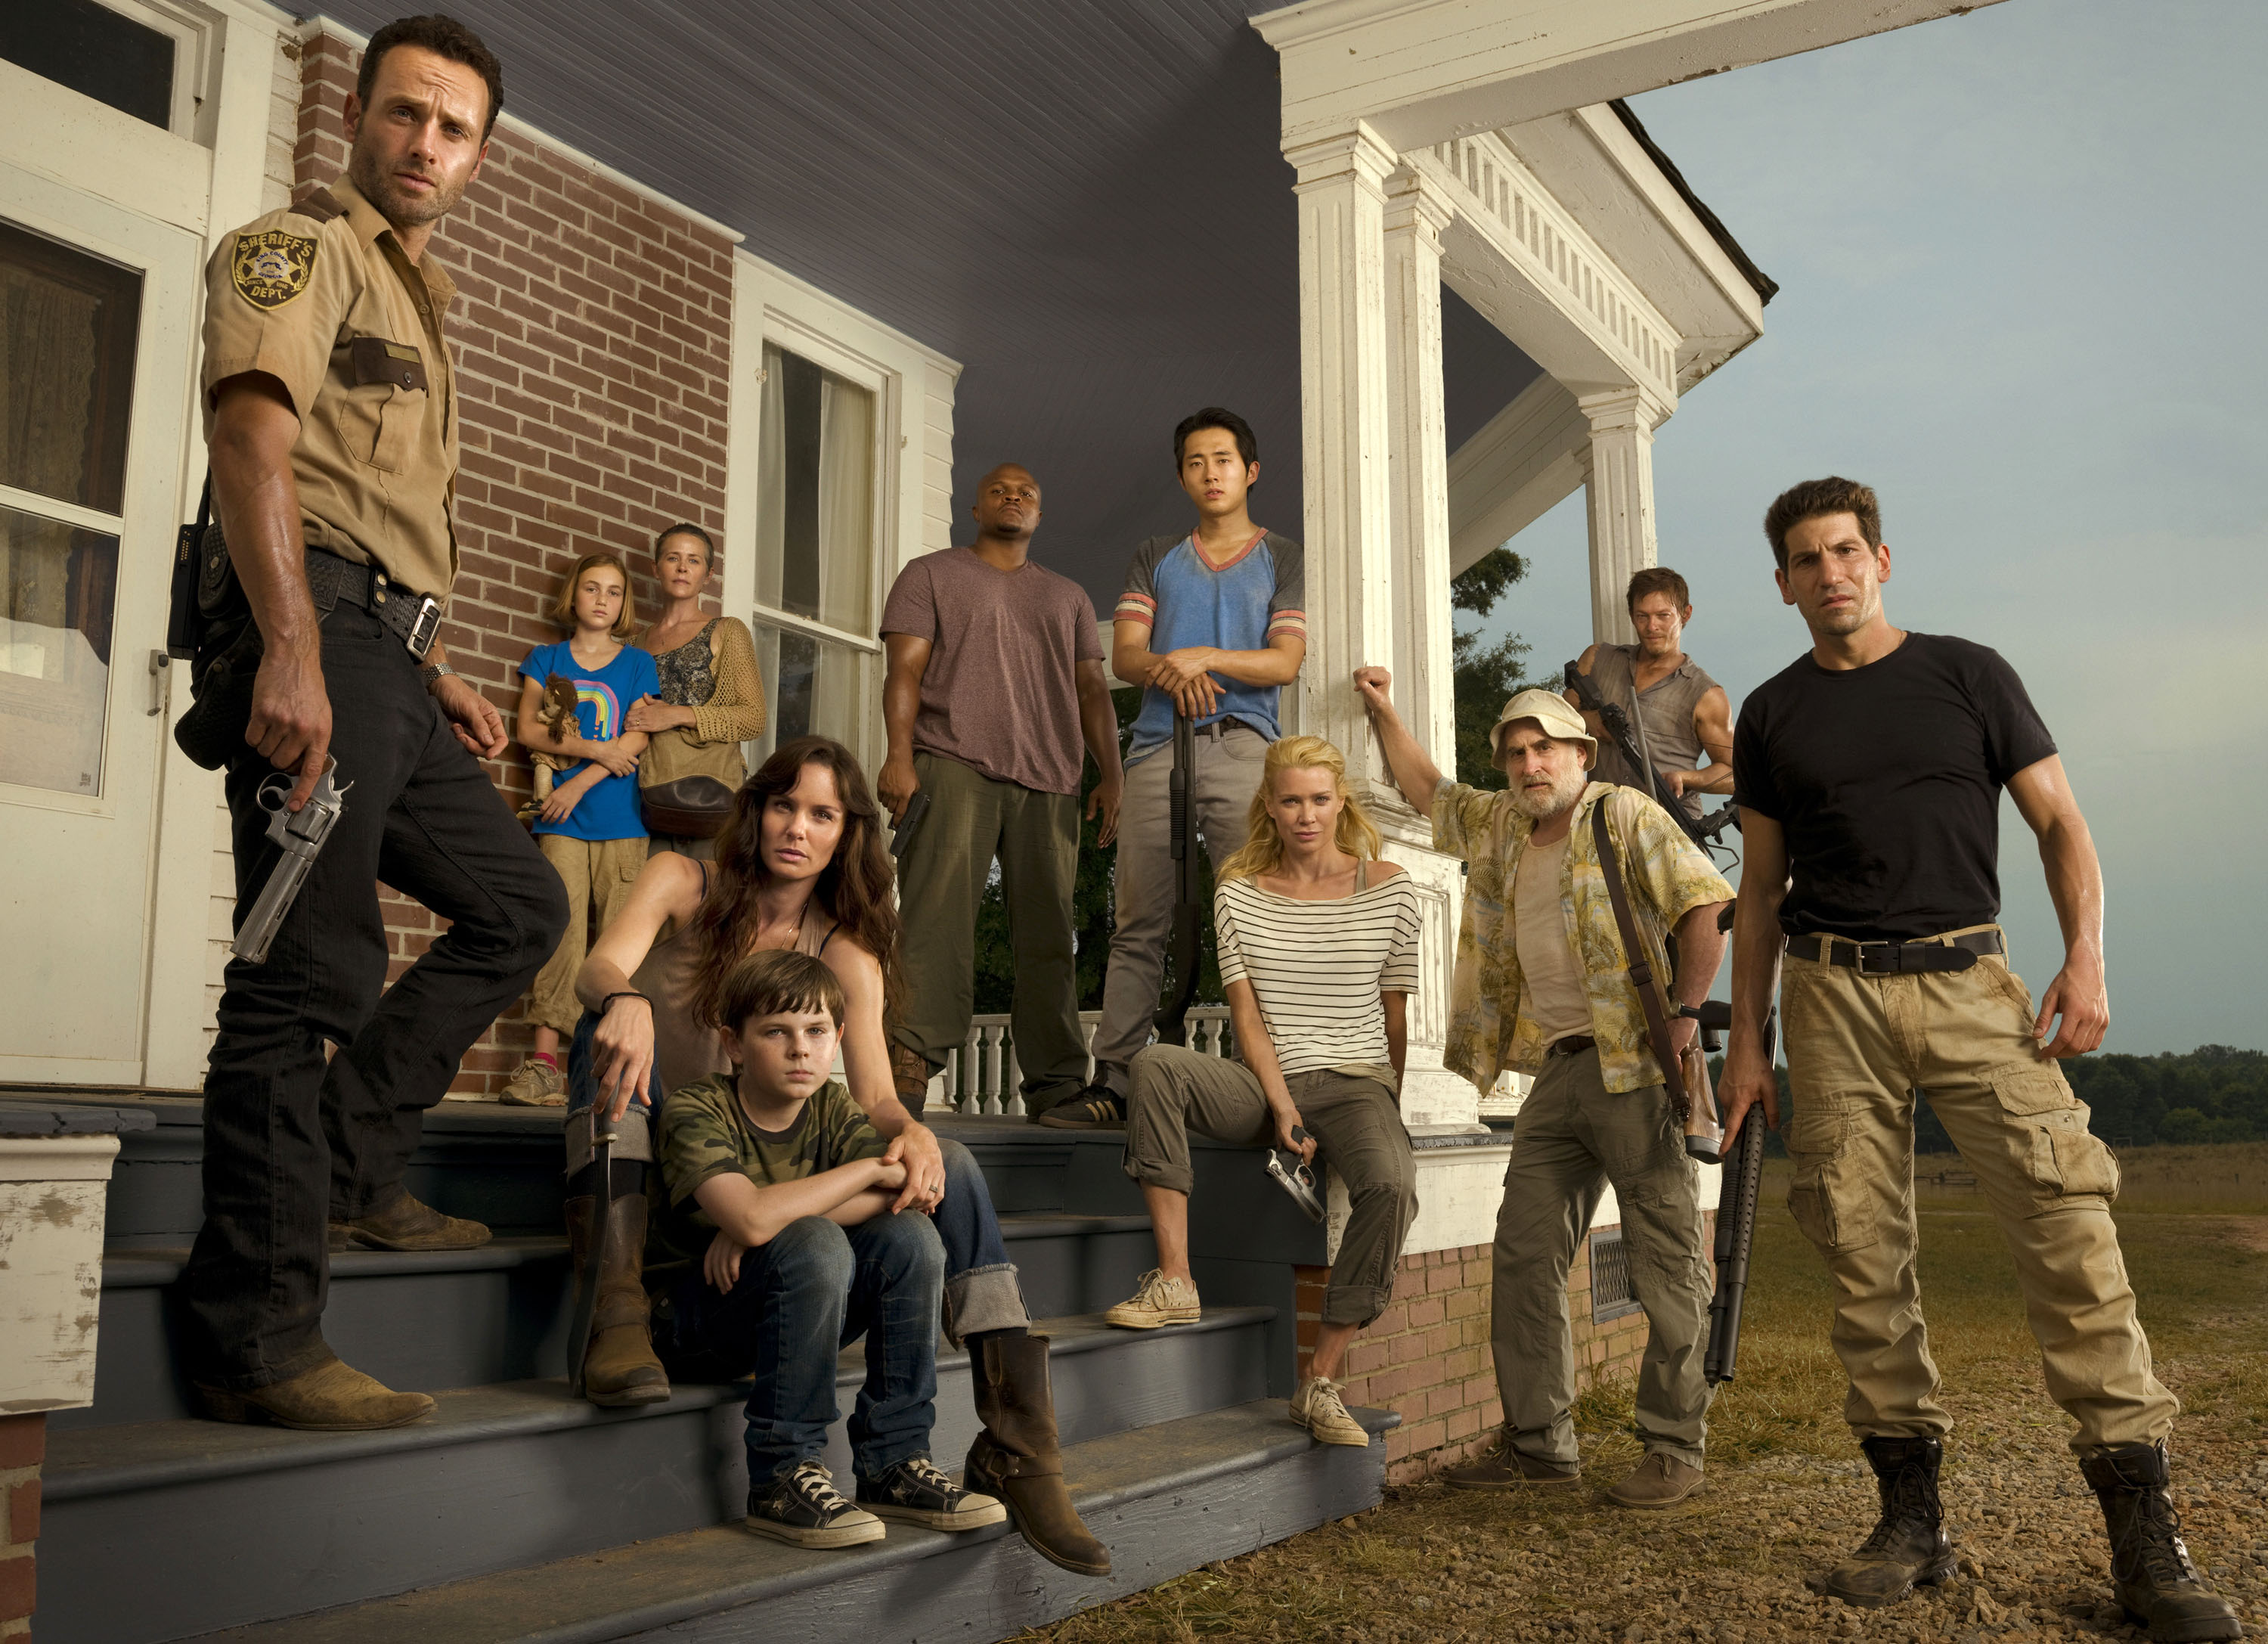 The Walking Dead Cast Poster Wallpapers